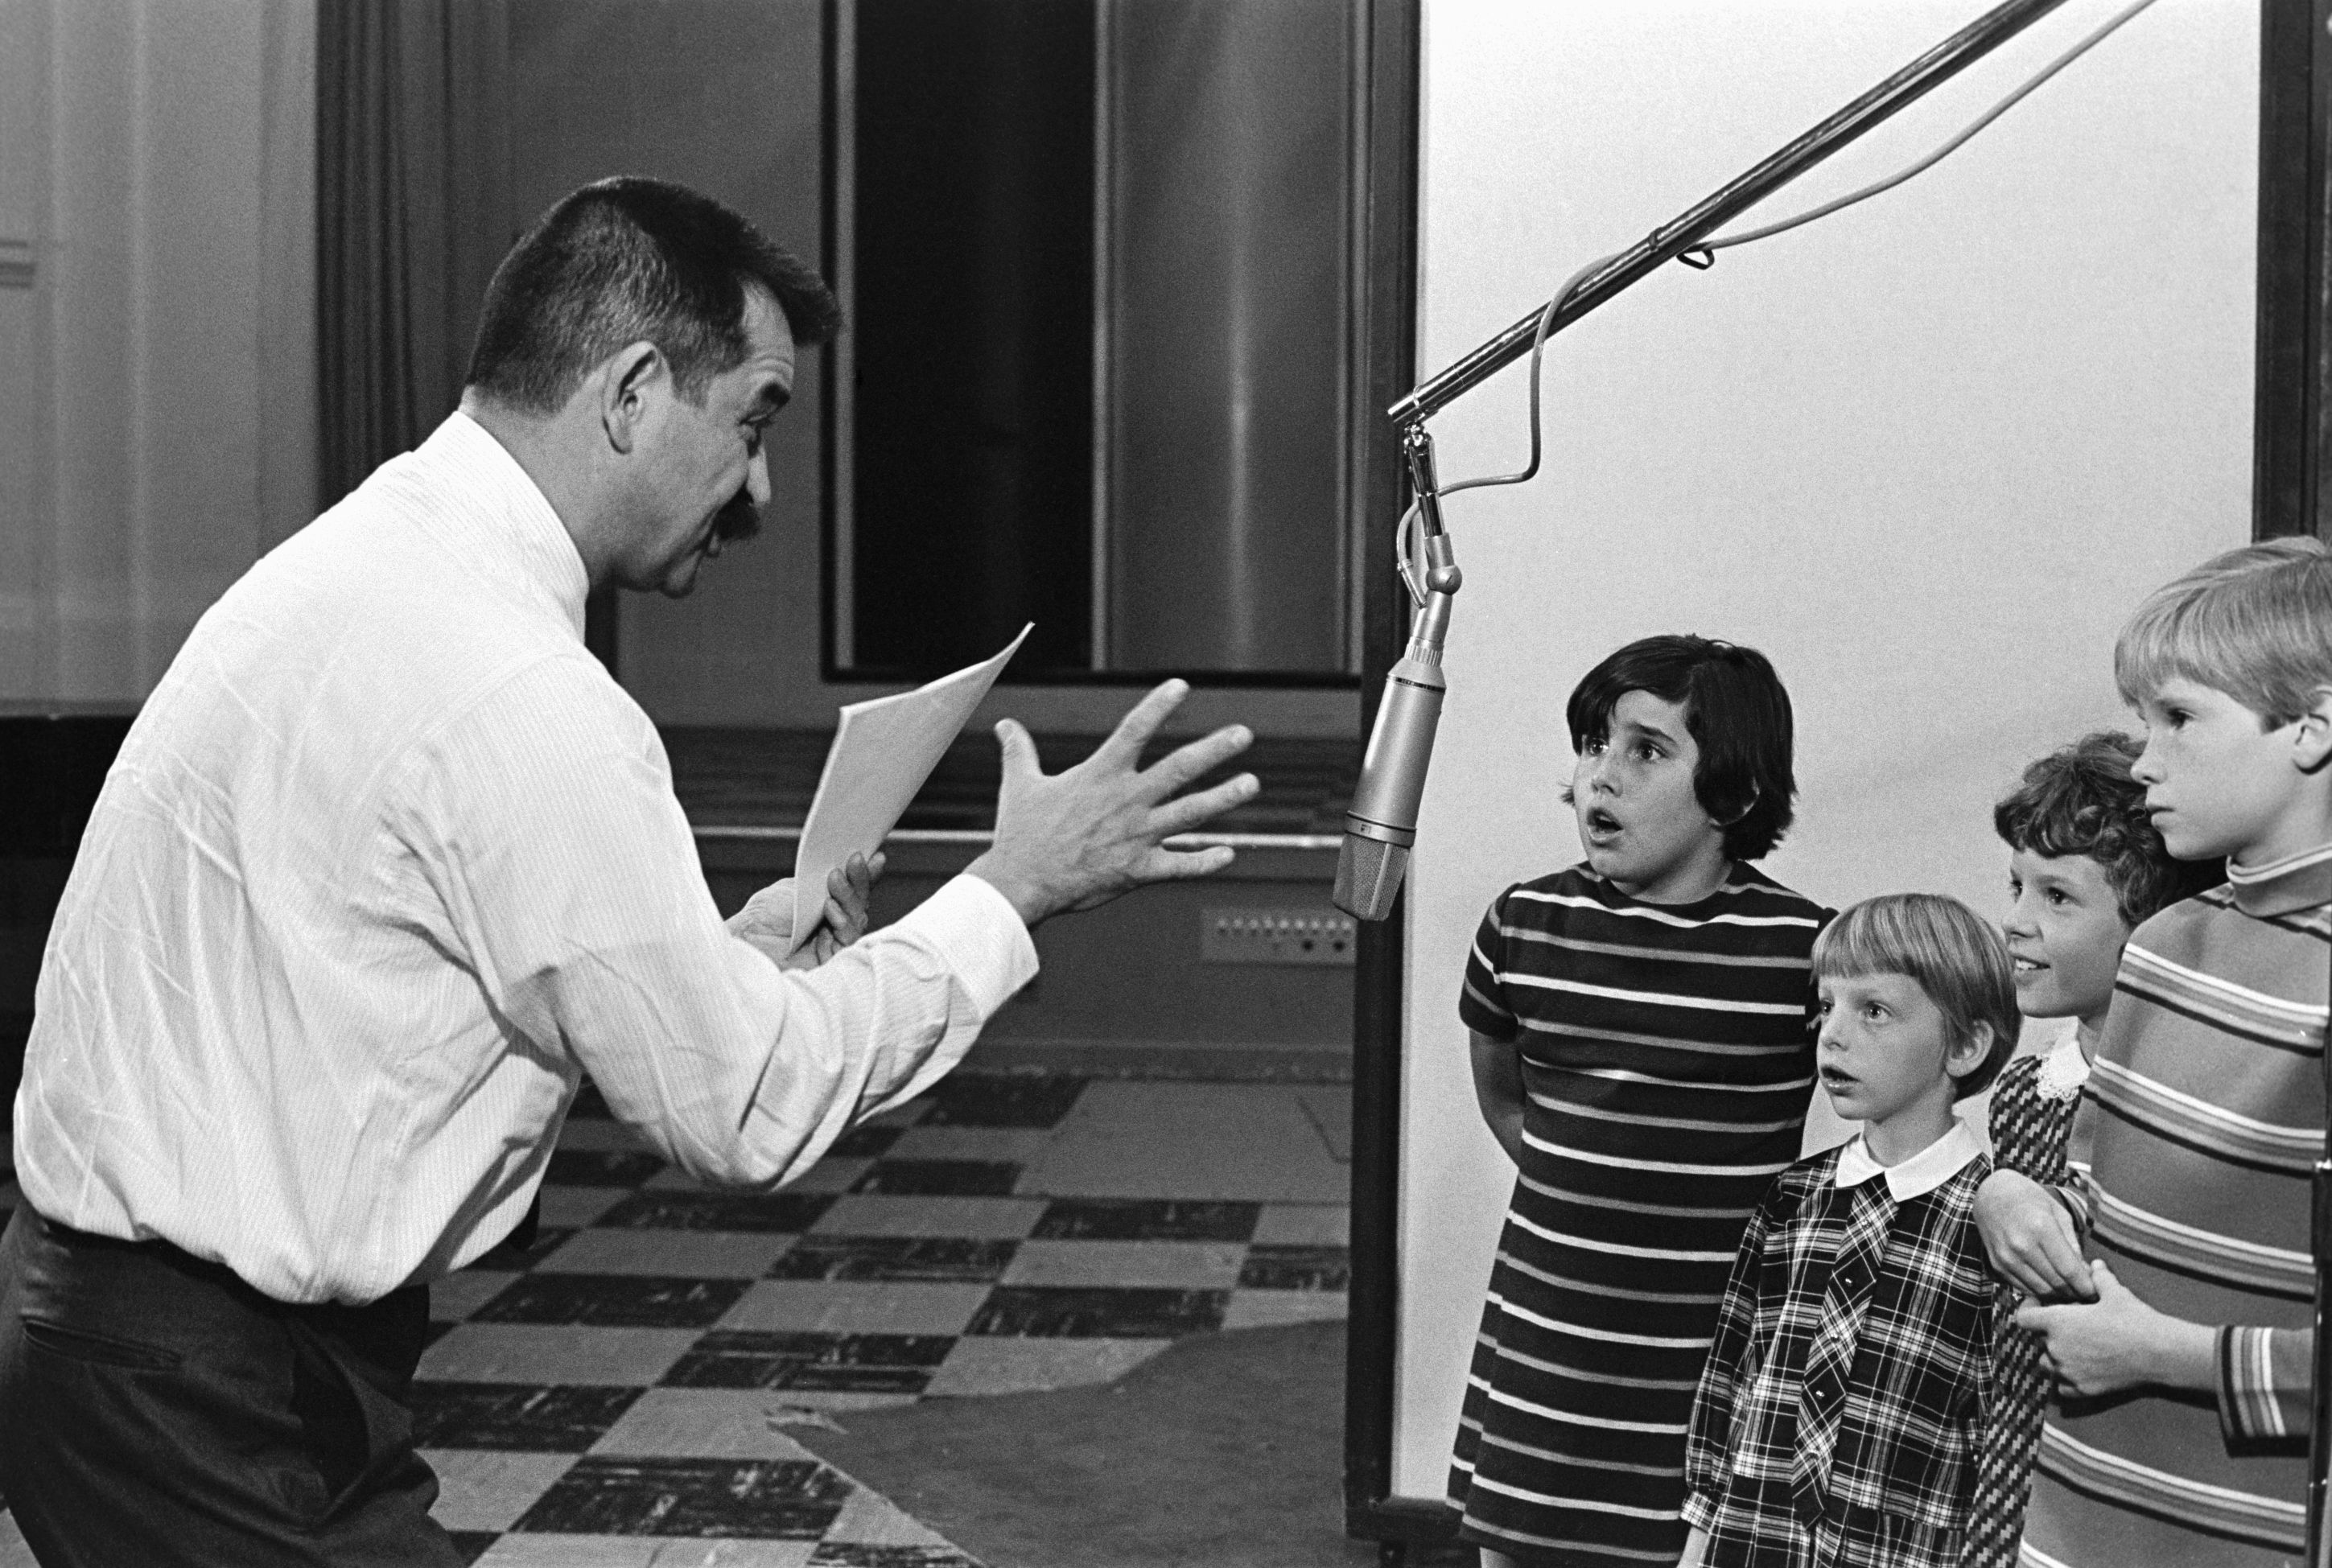 Producer Bill Melendez directs children who are recording the dialogue for the animated TV special, "It's the Great Pumpkin, Charlie Brown."